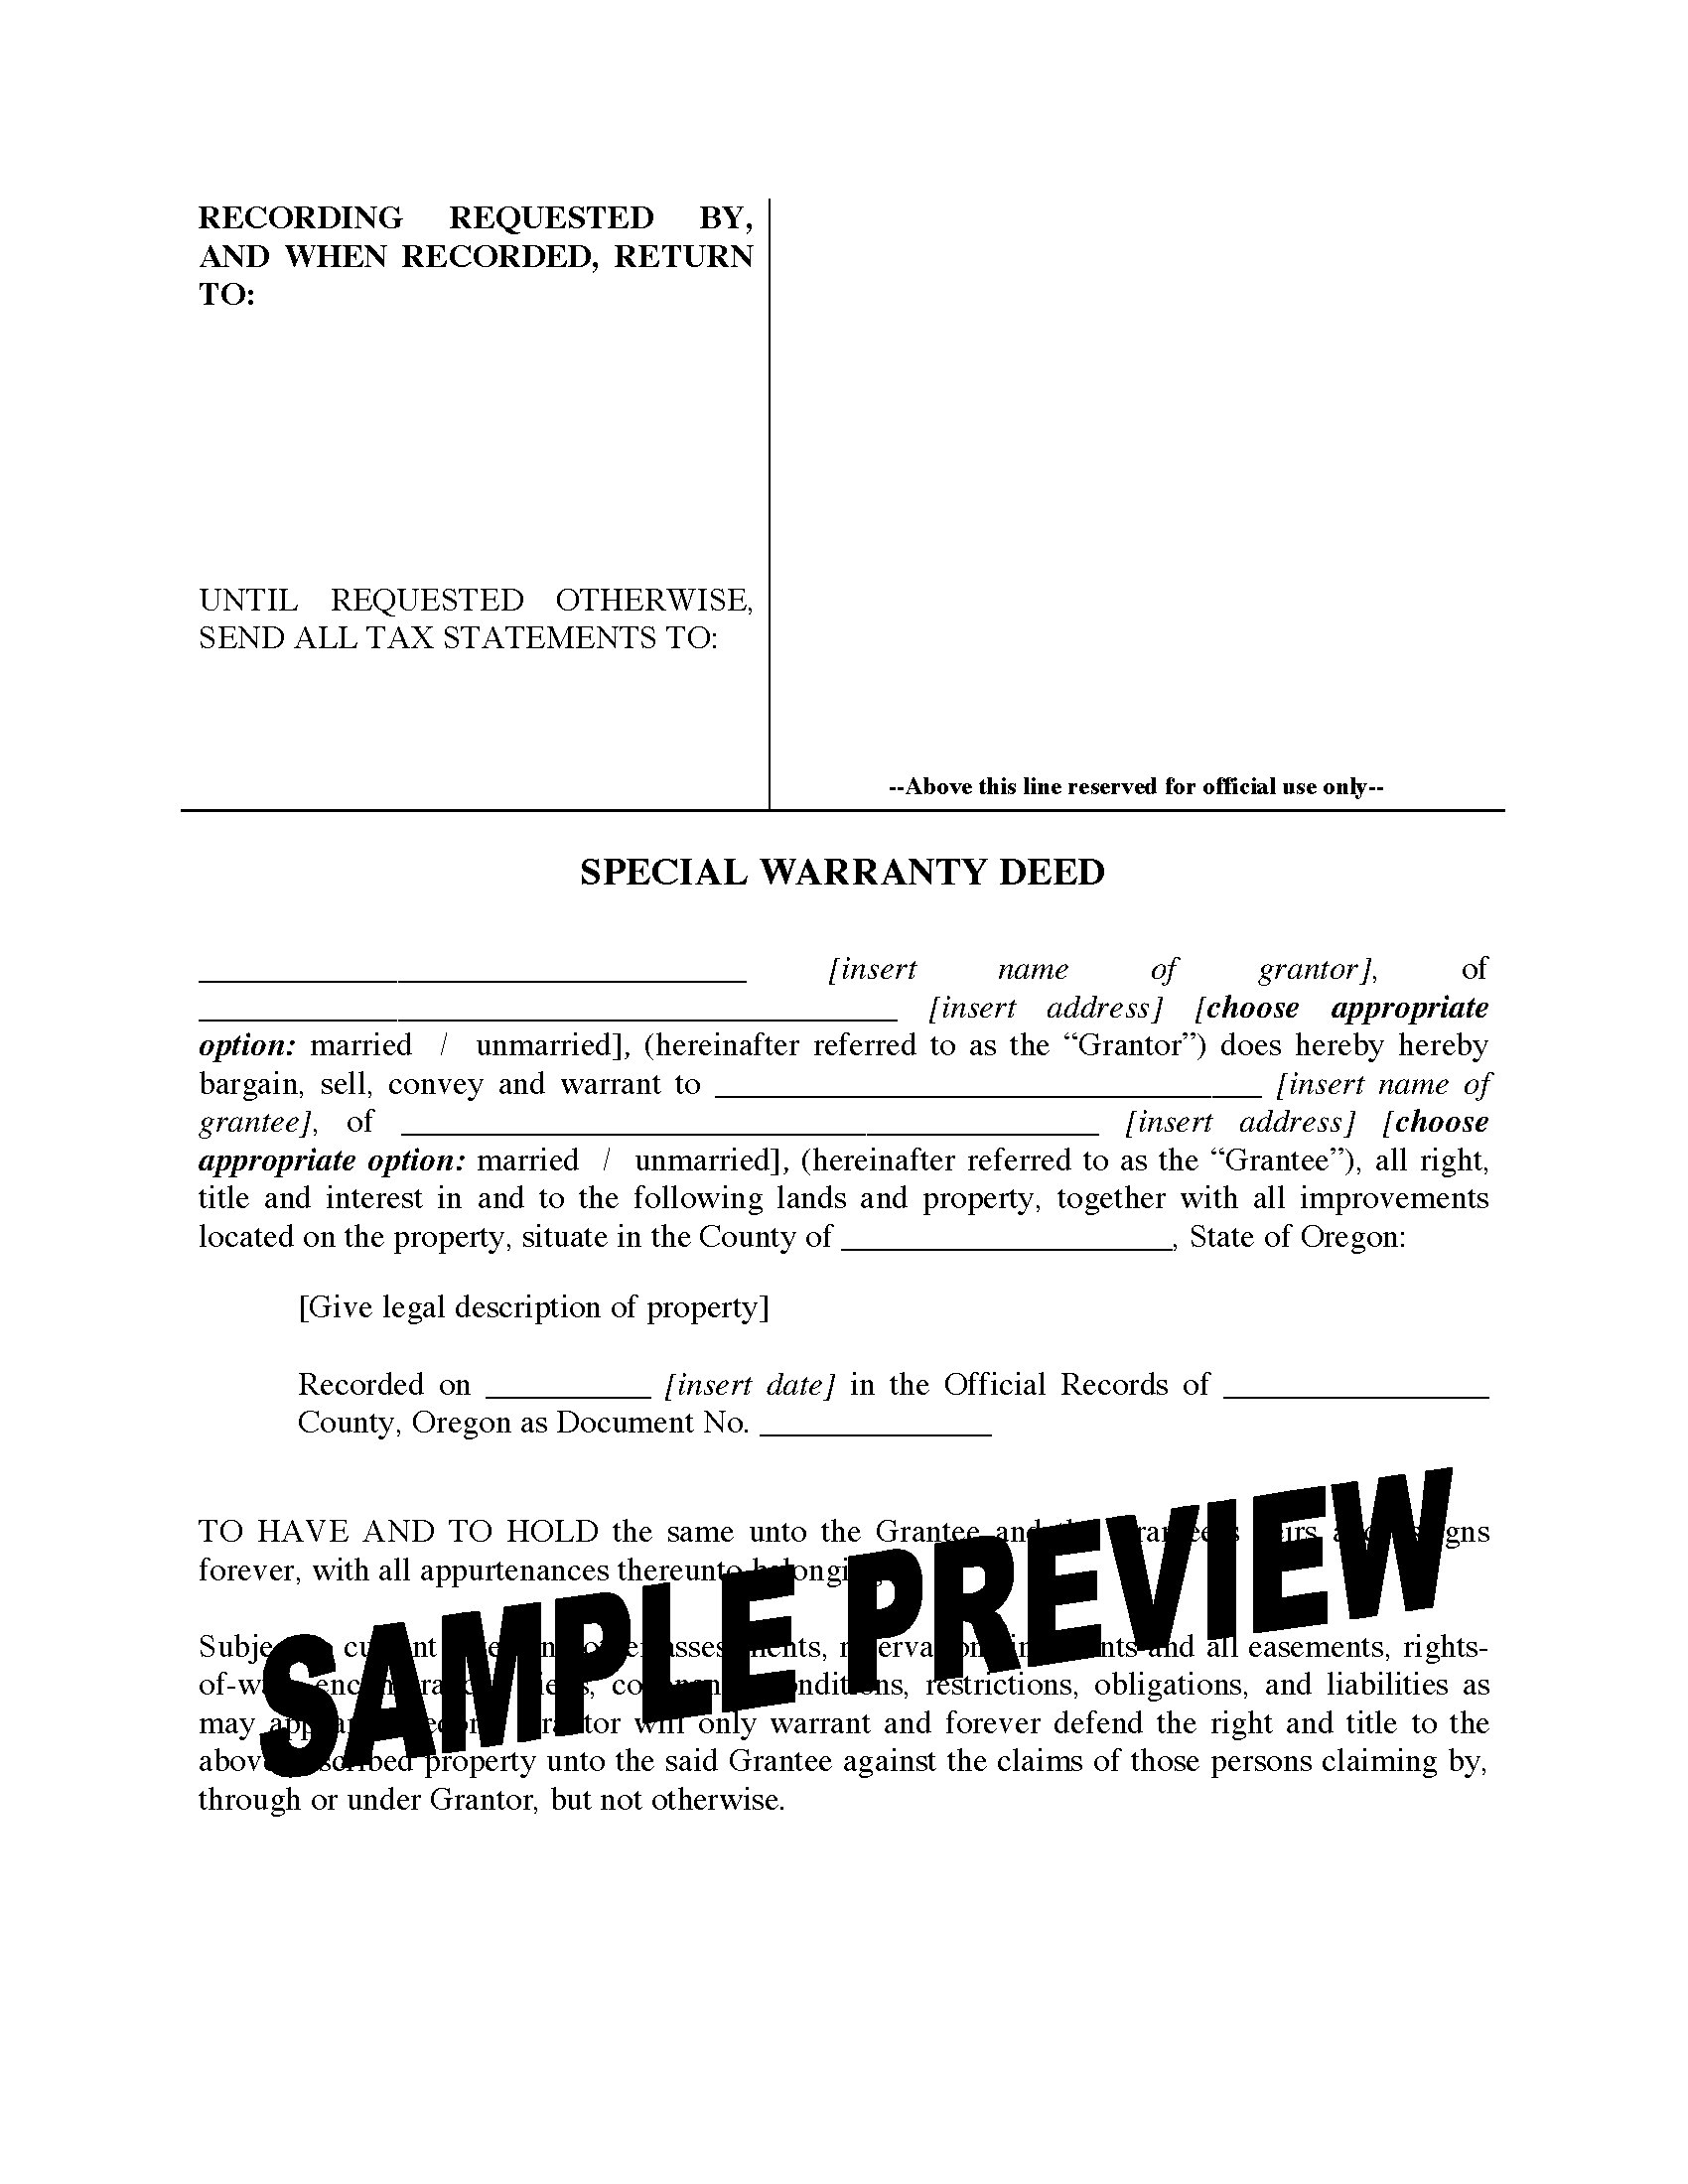 oregon-special-warranty-deed-legal-forms-and-business-templates